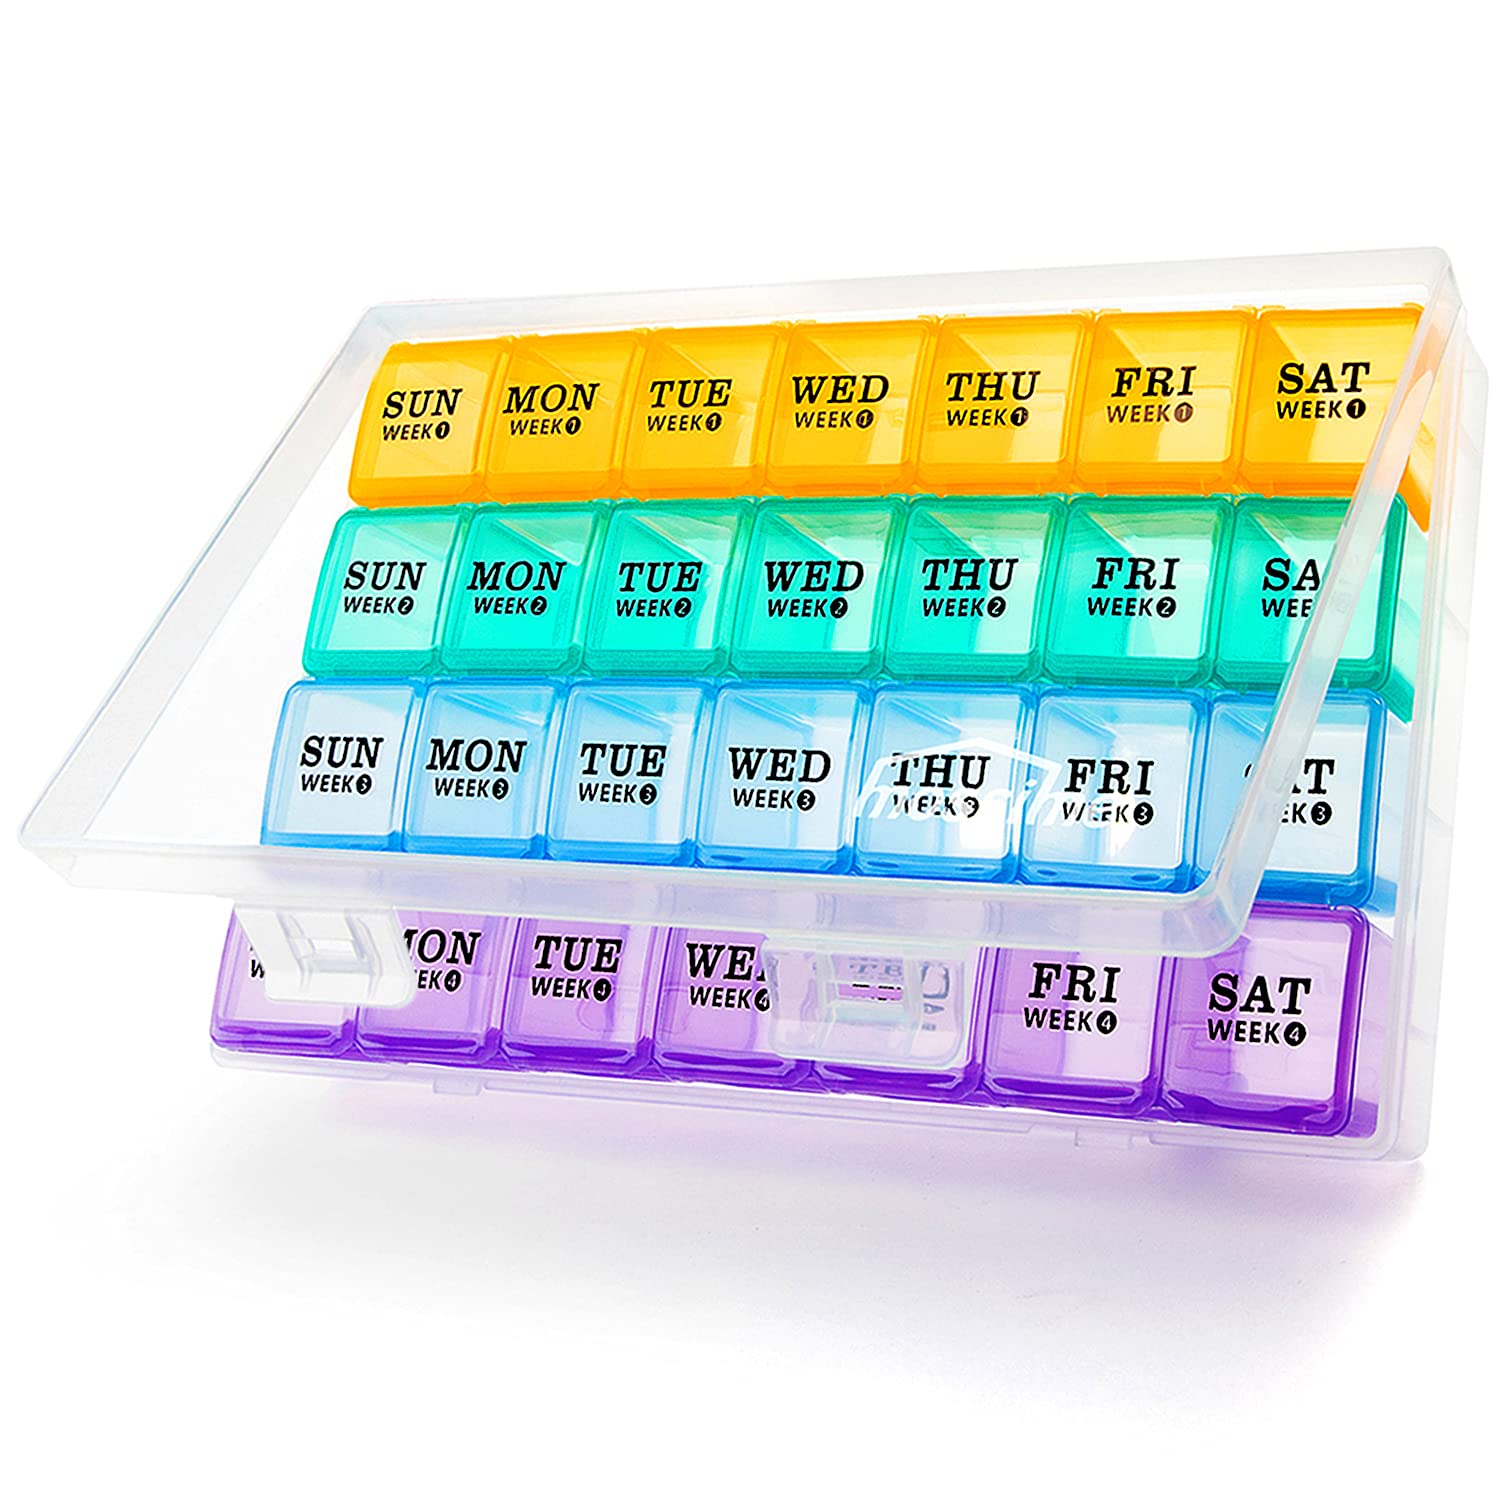 Mossime Large Monthly Pill Box Organiser 4 Week, Big Pill Organiser with Dust-Proof Case, Big Tablet Box for Family, Daily Dosette Box Medication Organiser, Vitamin Meds Supplement Container